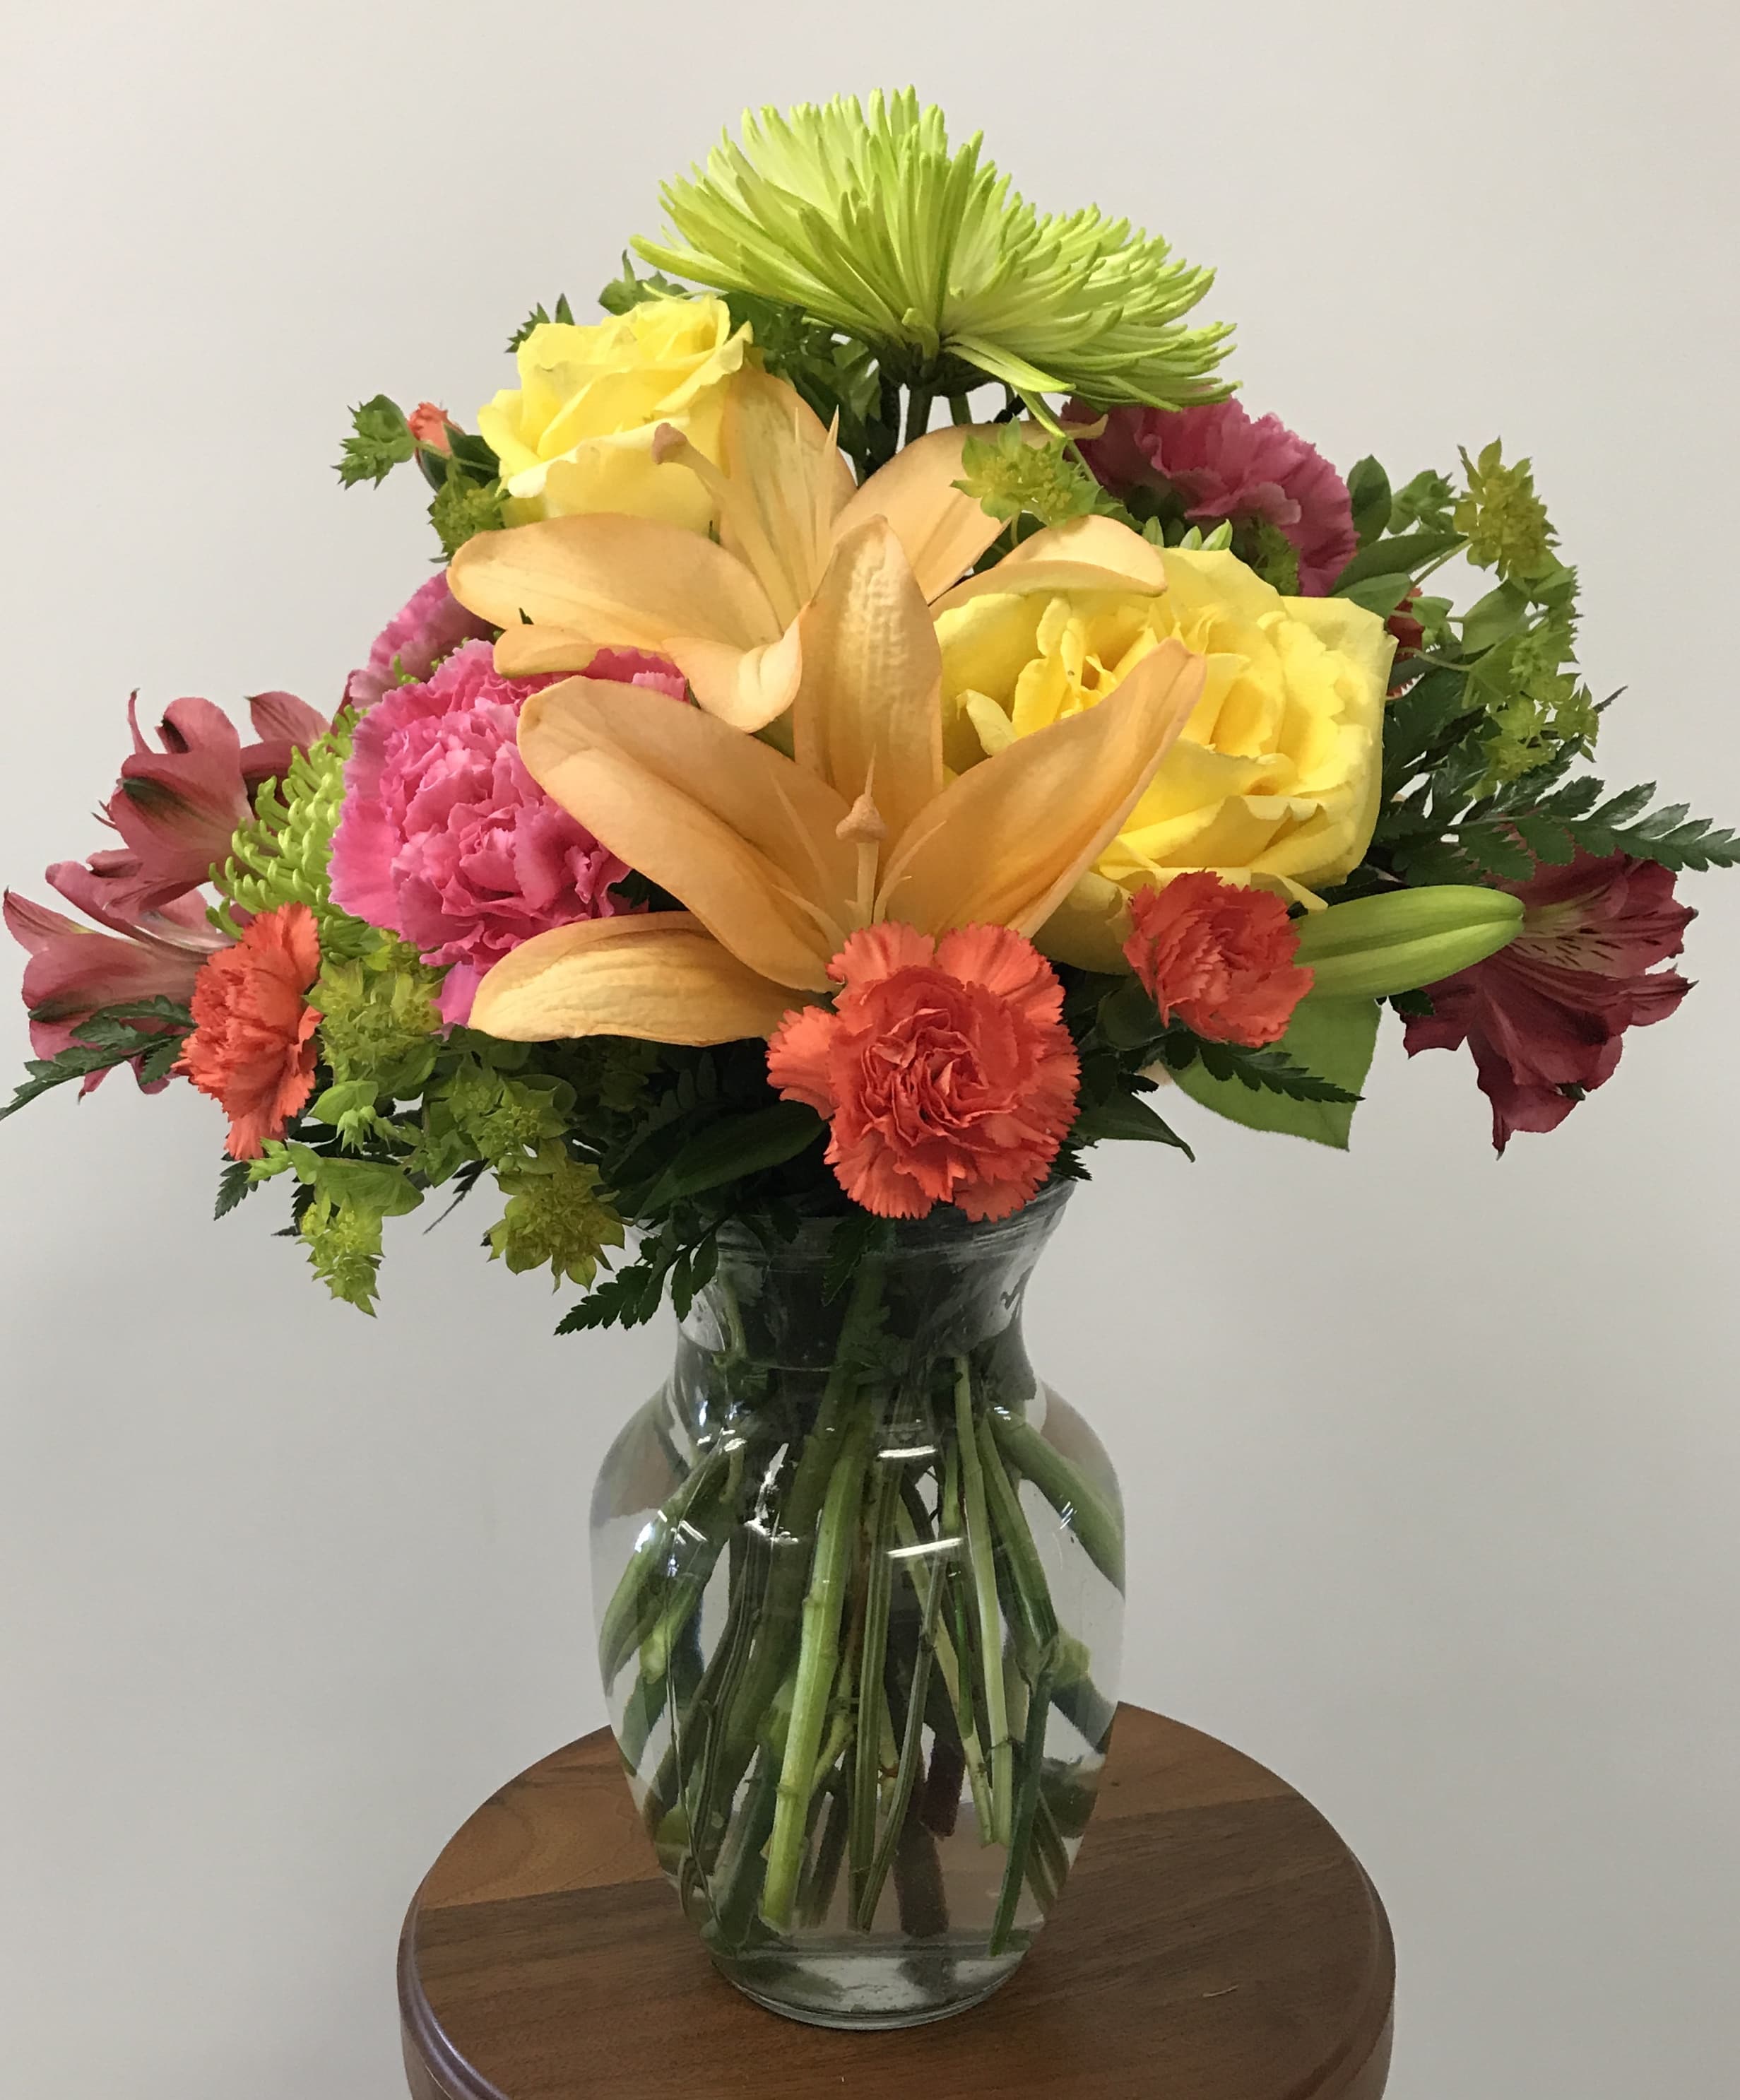 End of the Rainbow - Hot fun in the summertime is here, and it's flowerific to be sure! This beautiful bouquet brings together a rainbow of the season's brightest blossoms. Hot pinks, oranges, greens and yellows are delivered in a charming glass vase.  It is sure to brighten someone's day. 